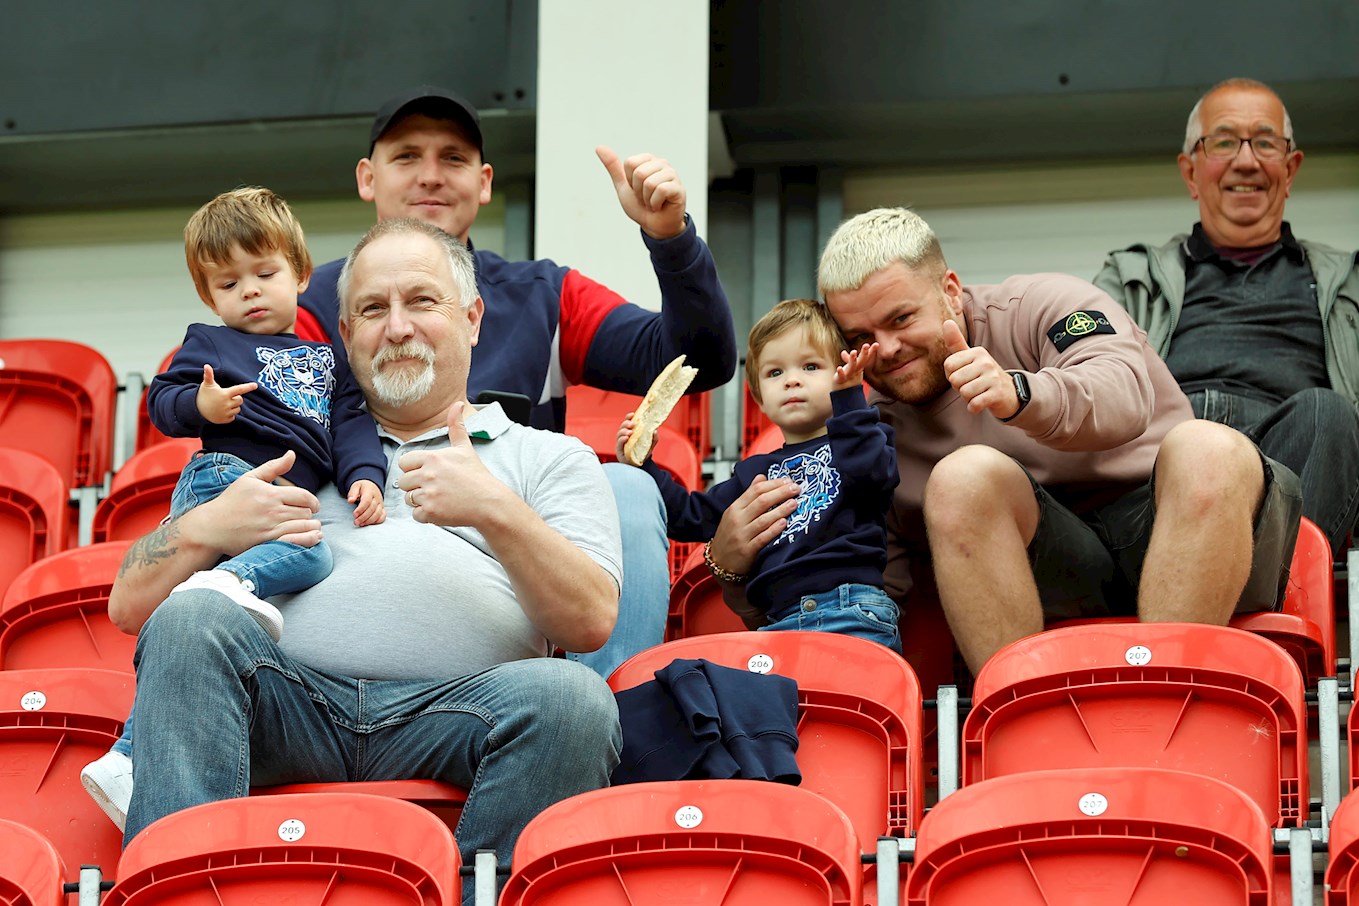 RUFC v Plymouth Argyle - 042 - Key Workers.jpg